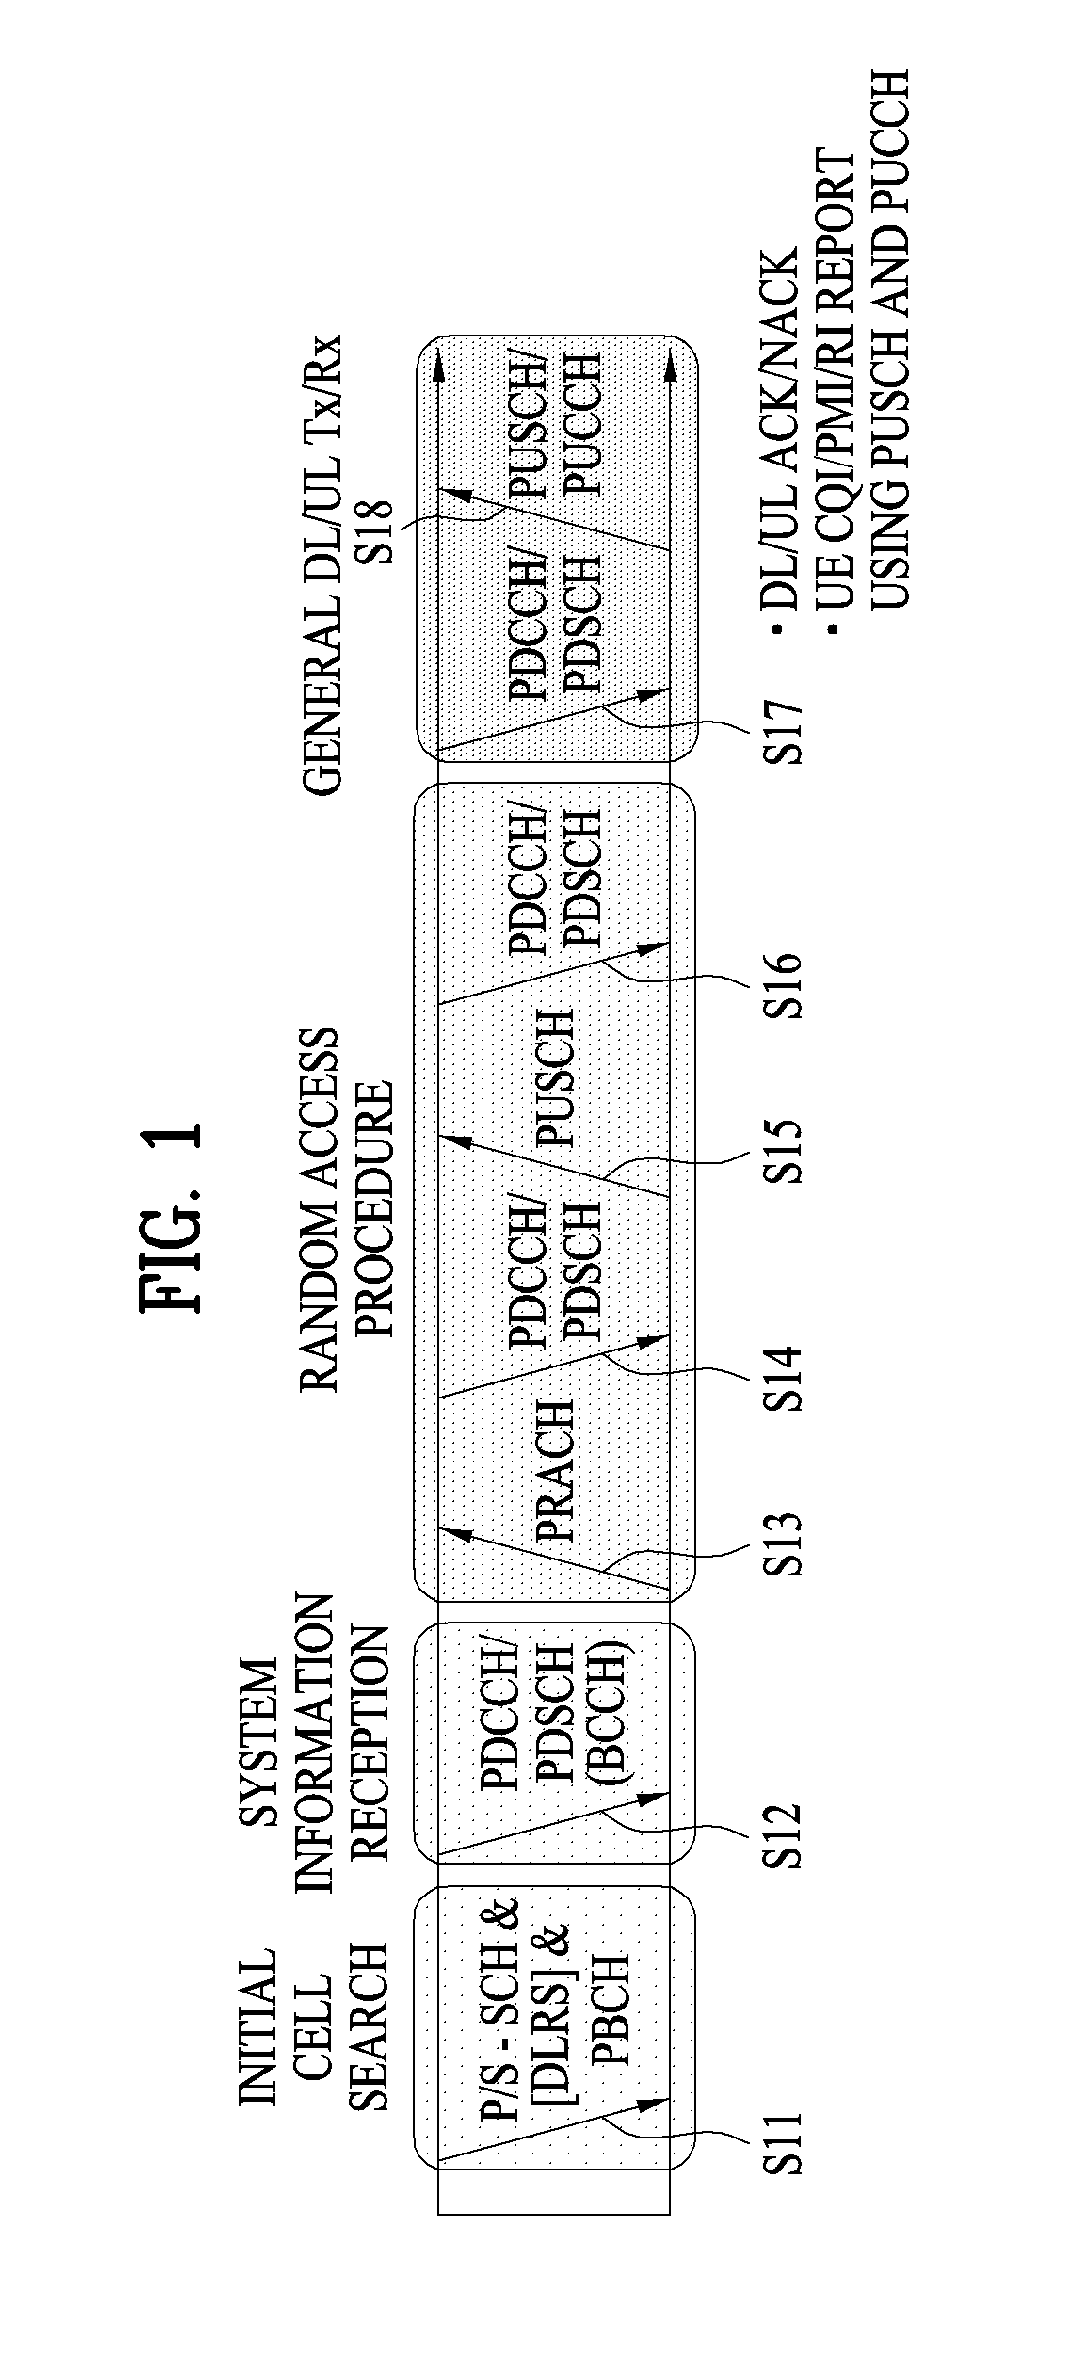 Method for transceiving downlink control information in a wireless access system and apparatus therefor